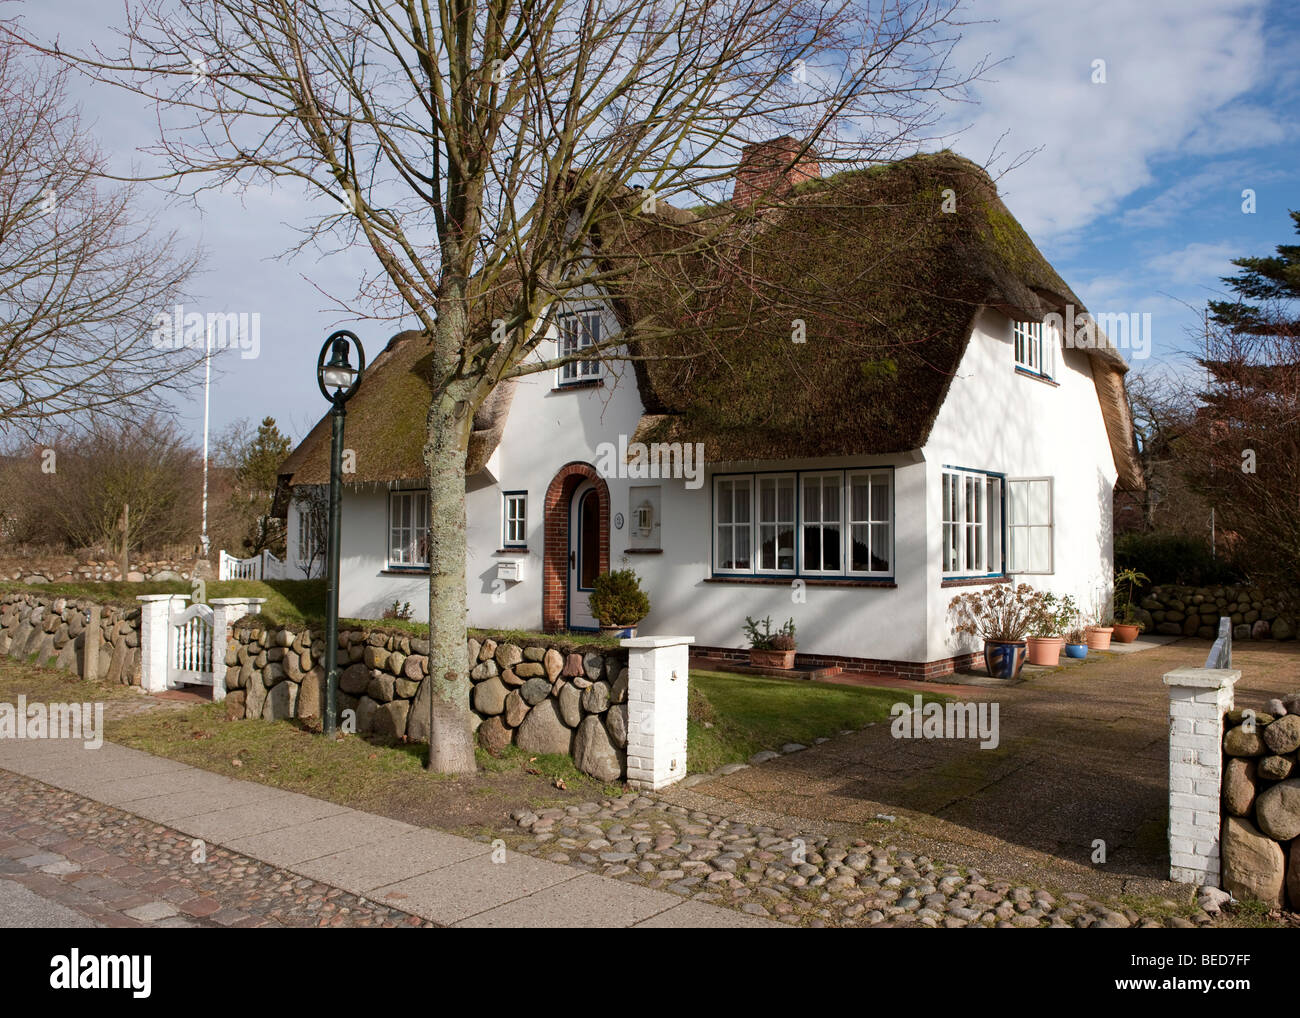 Typical house with a thatched roof, Keitum, Sylt Island, North Frisian Islands, Schleswig-Holstein, Germany, Europe Stock Photo